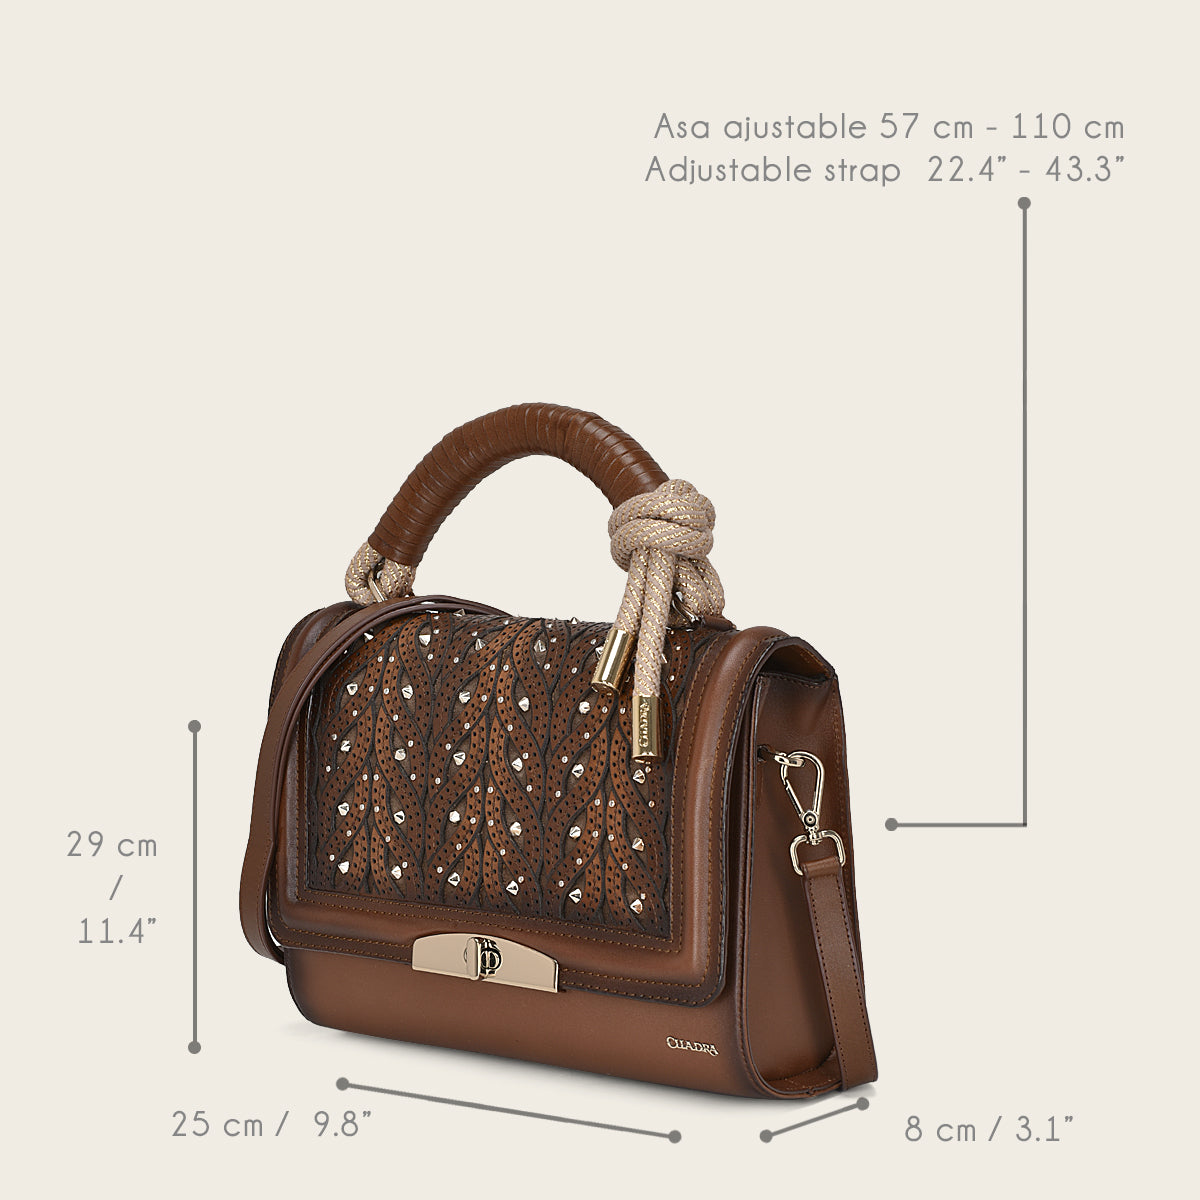 Brown handcrafted handbag with a high detailed stitching